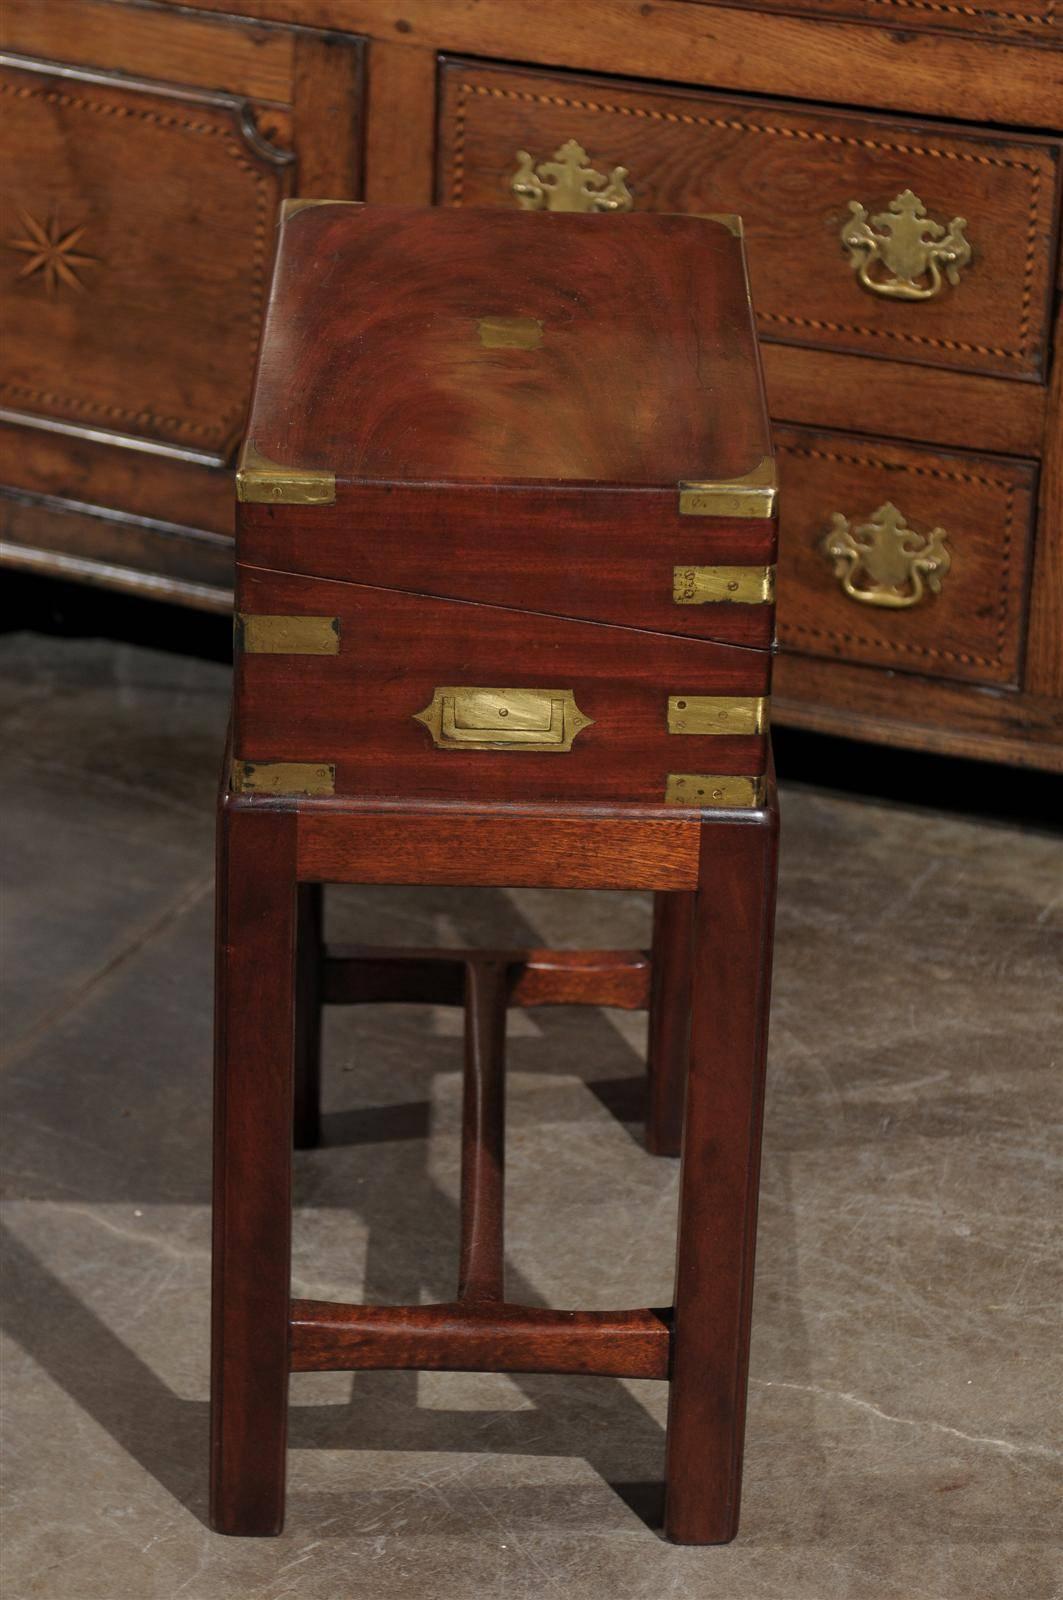 19th Century English Mahogany Writing Box or Lap Desk on Stand with Brass Handles and Storage